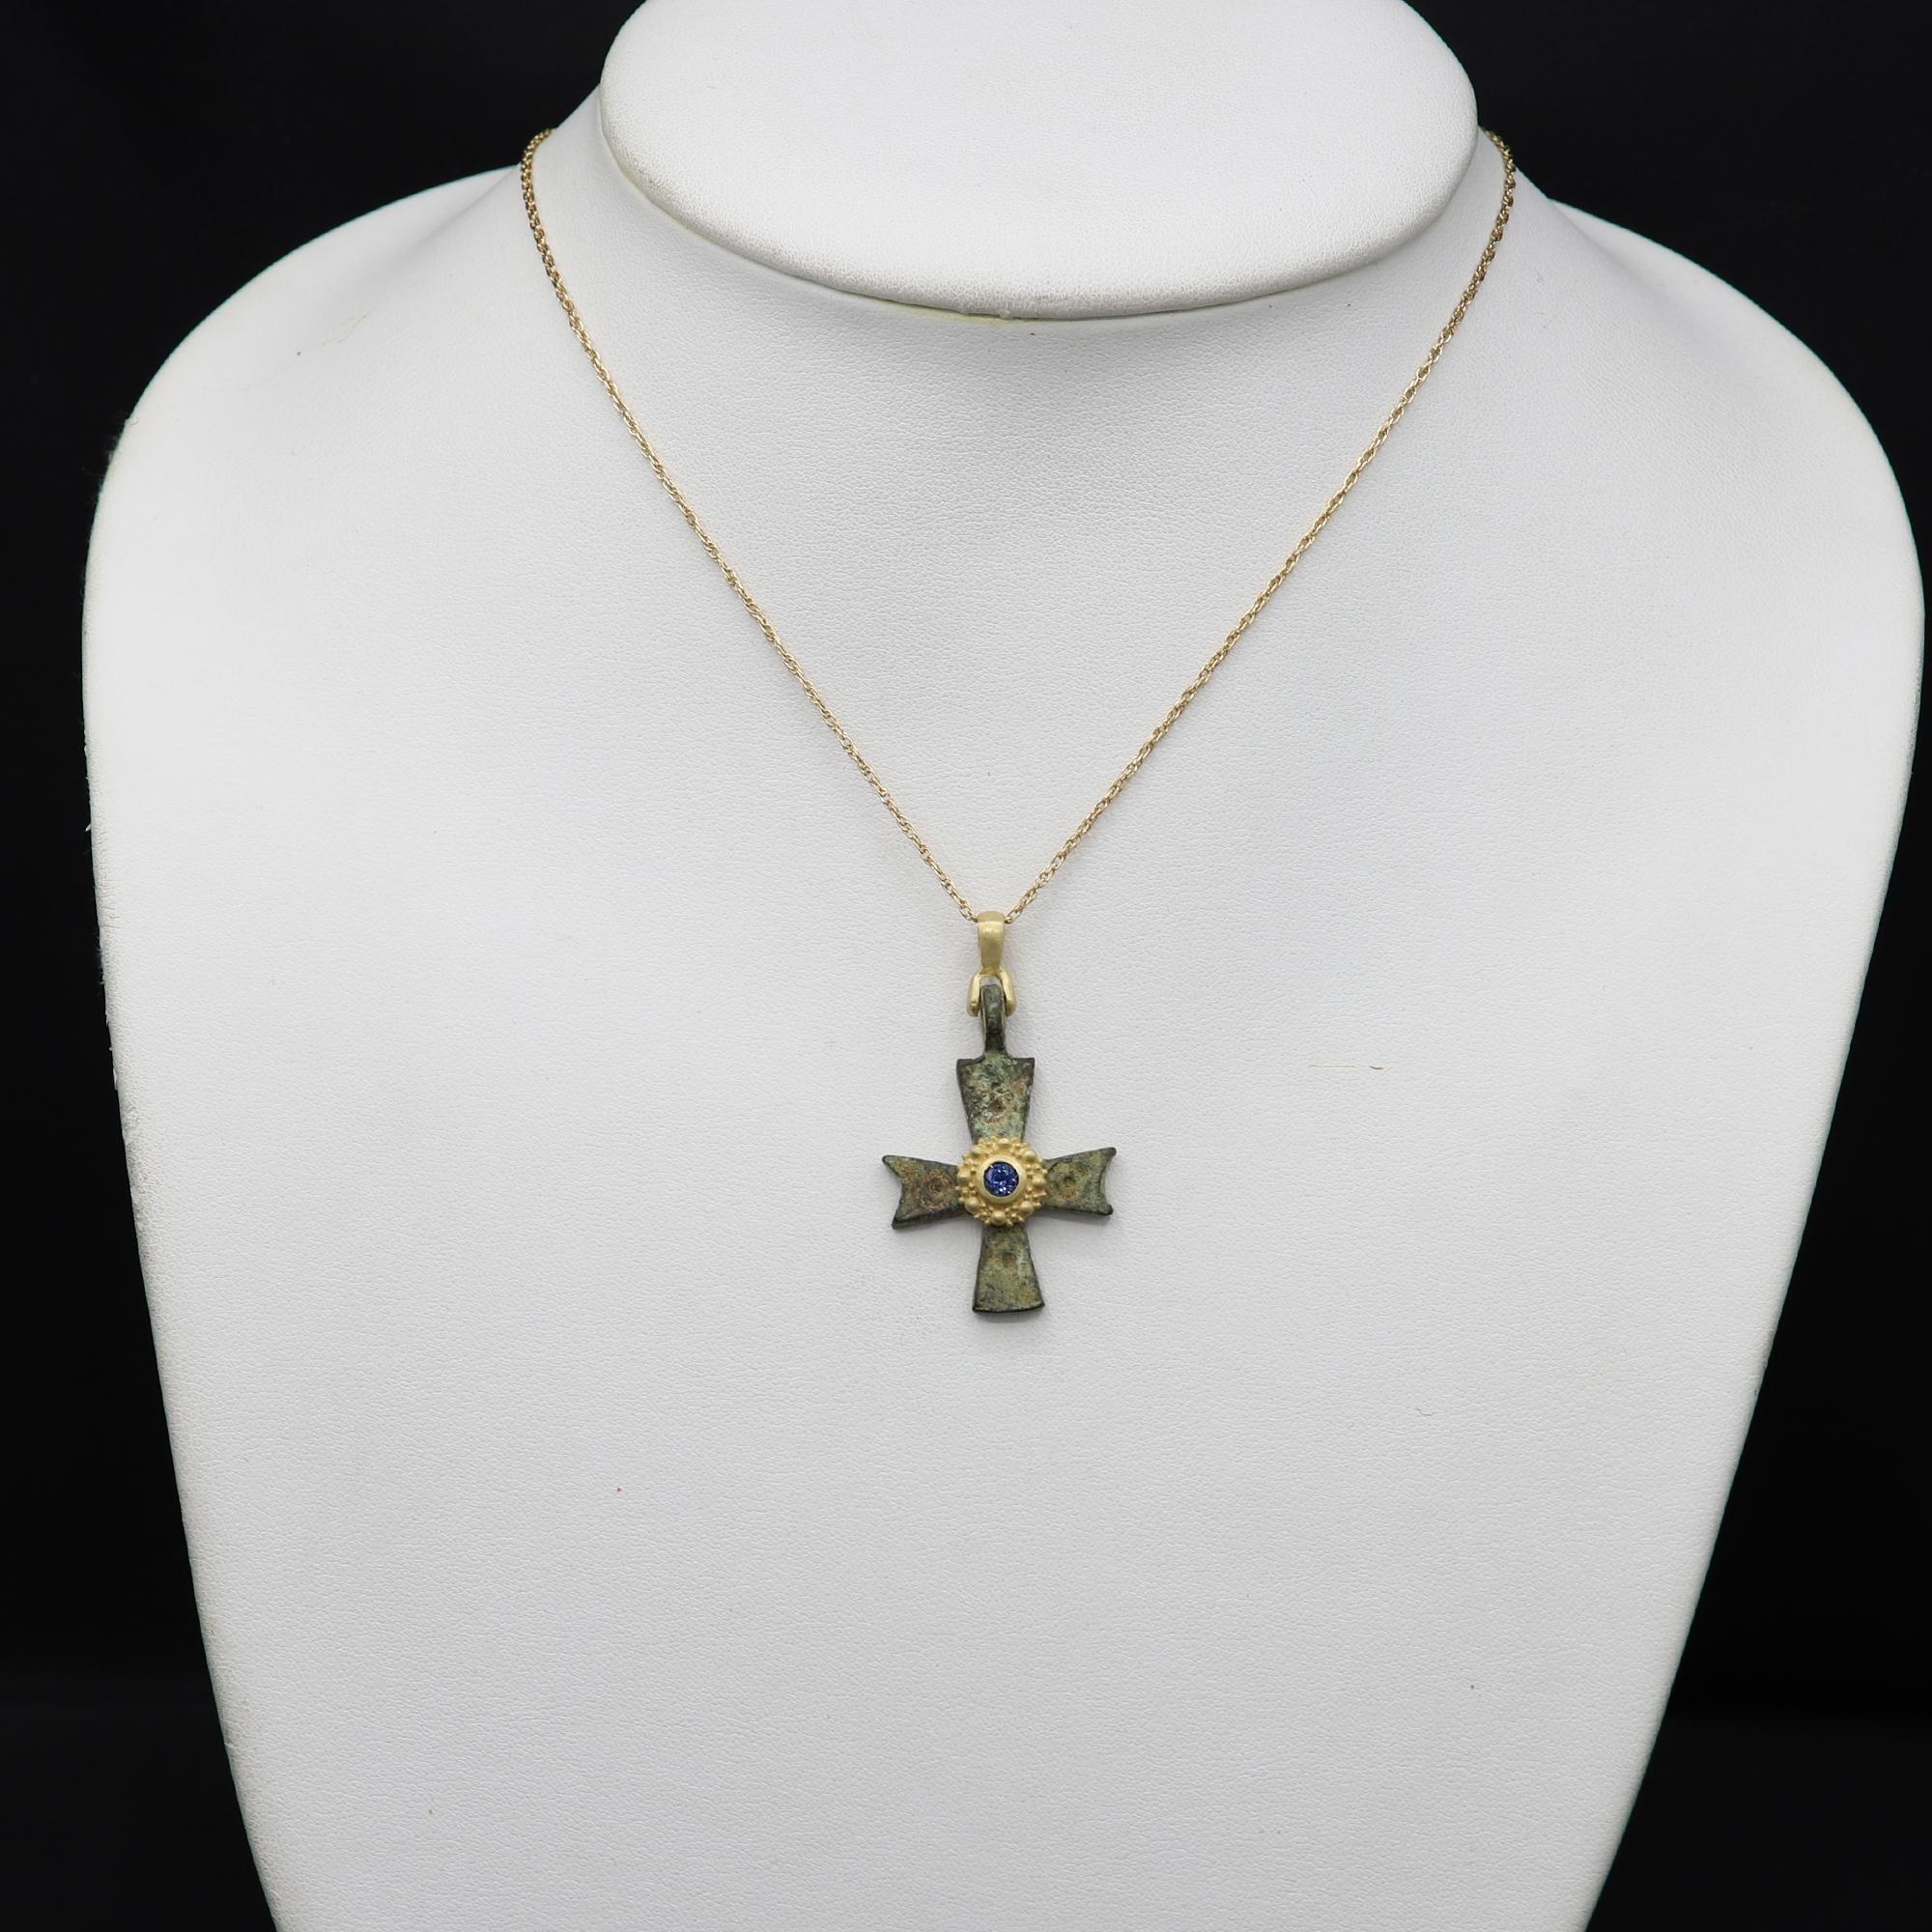 Magnificent piece of History - can be yours today !
Ancient Byzantine Period cross.
Hand set in Italy with 18k Yellow Gold & Blue Sapphire.
Approx size 1' inch / 25 mm.
This Antique Bronze Cross is estimated from 600-900 AD 
Included 16' - 18' Inch